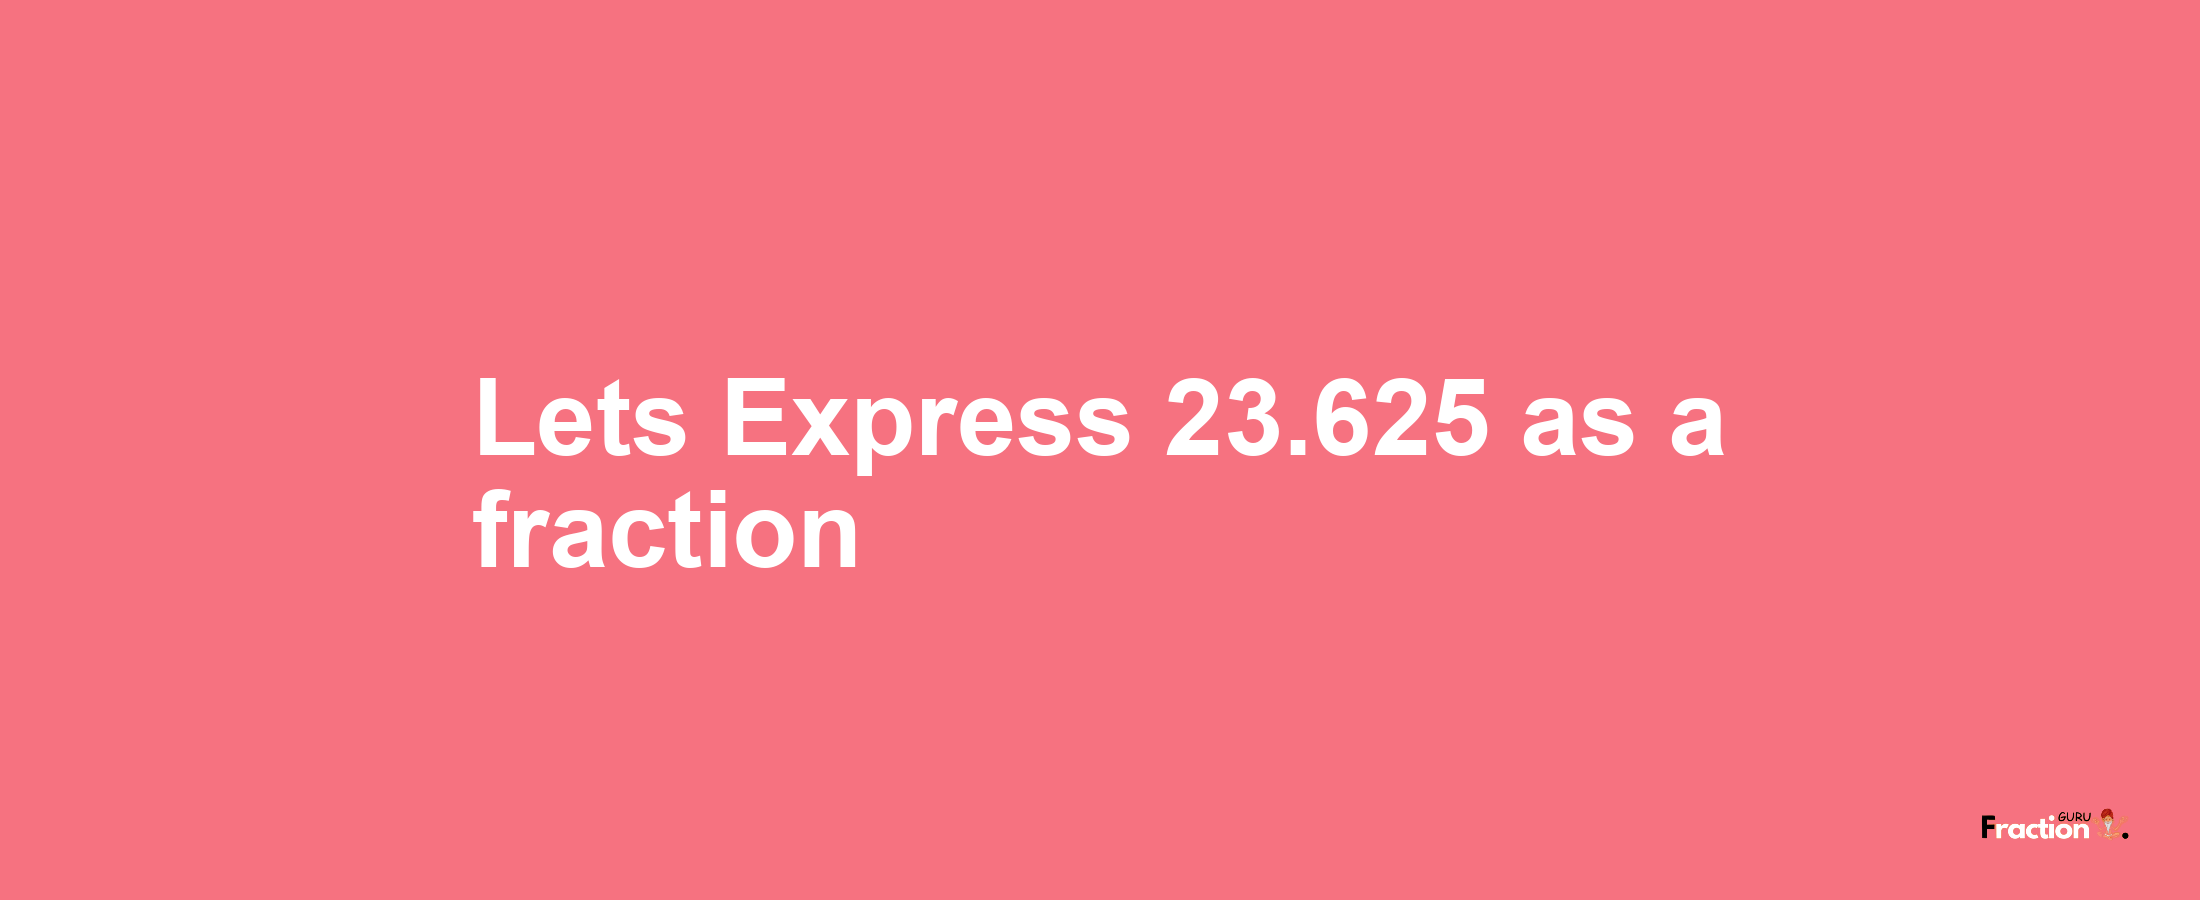 Lets Express 23.625 as afraction